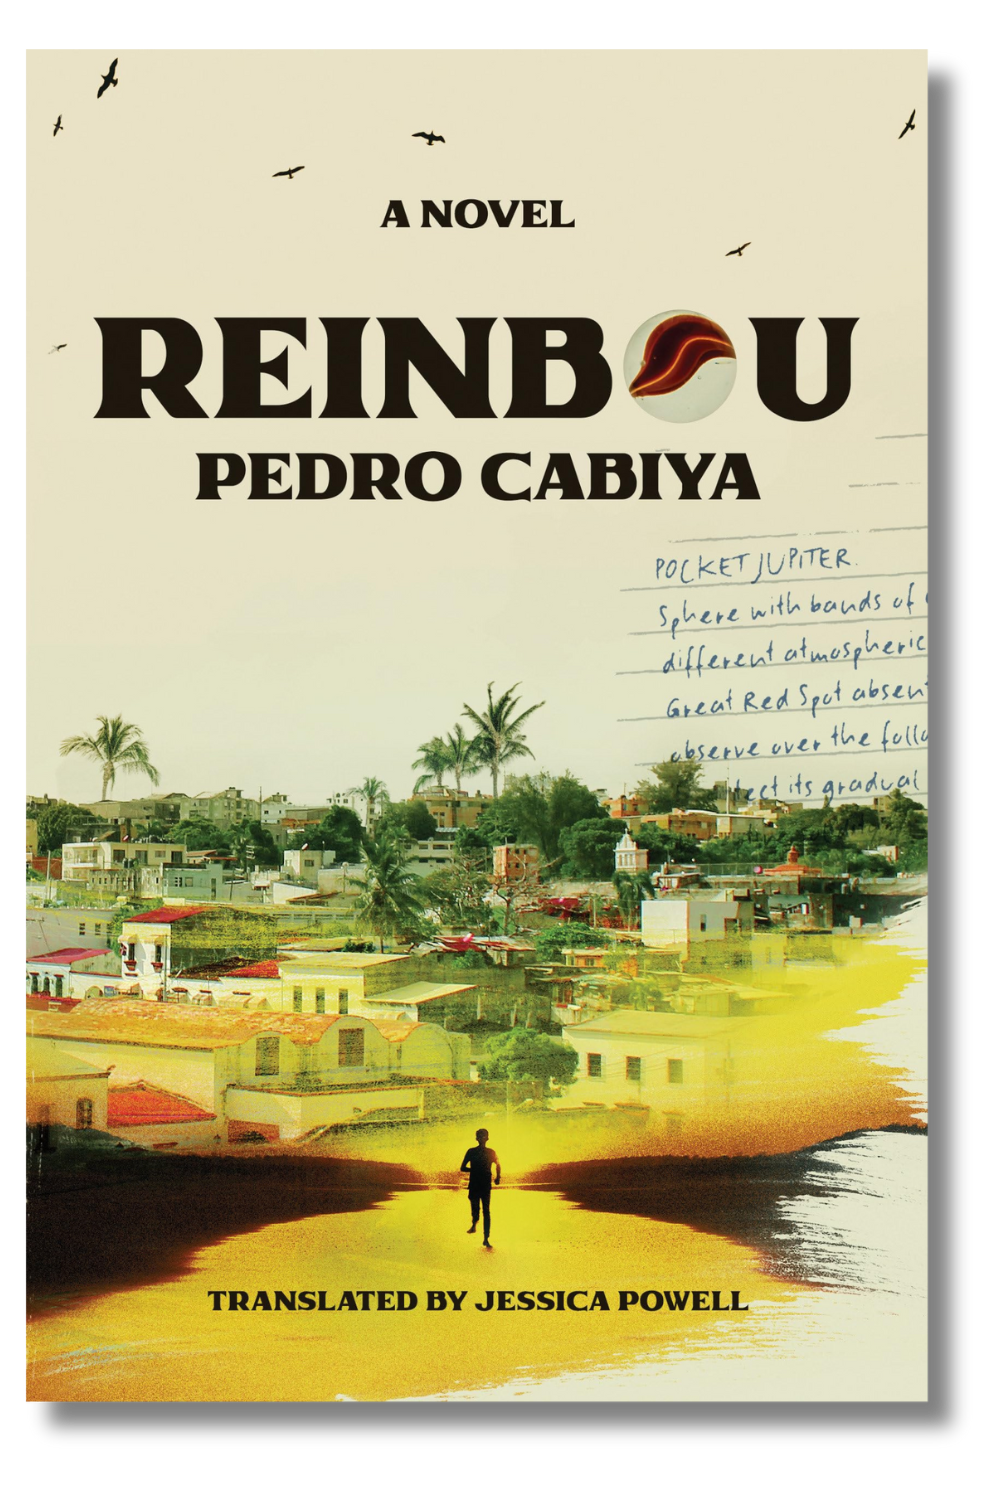 The cover of "Reinbou" by Pedro Cabiya, tr. by Jessica Powell